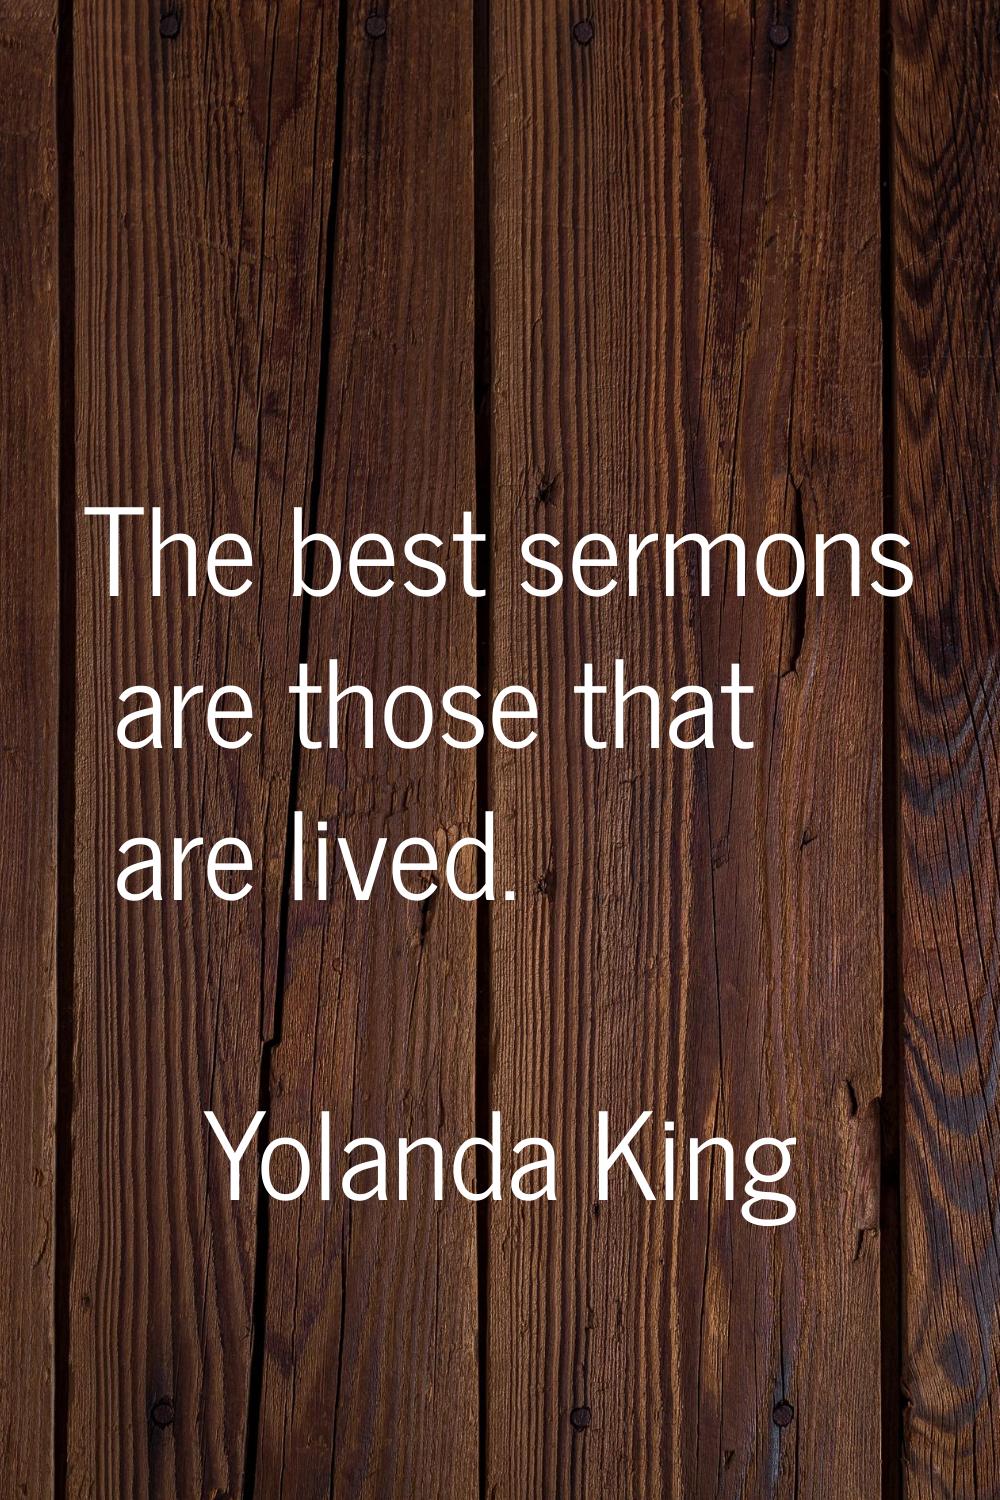 The best sermons are those that are lived.